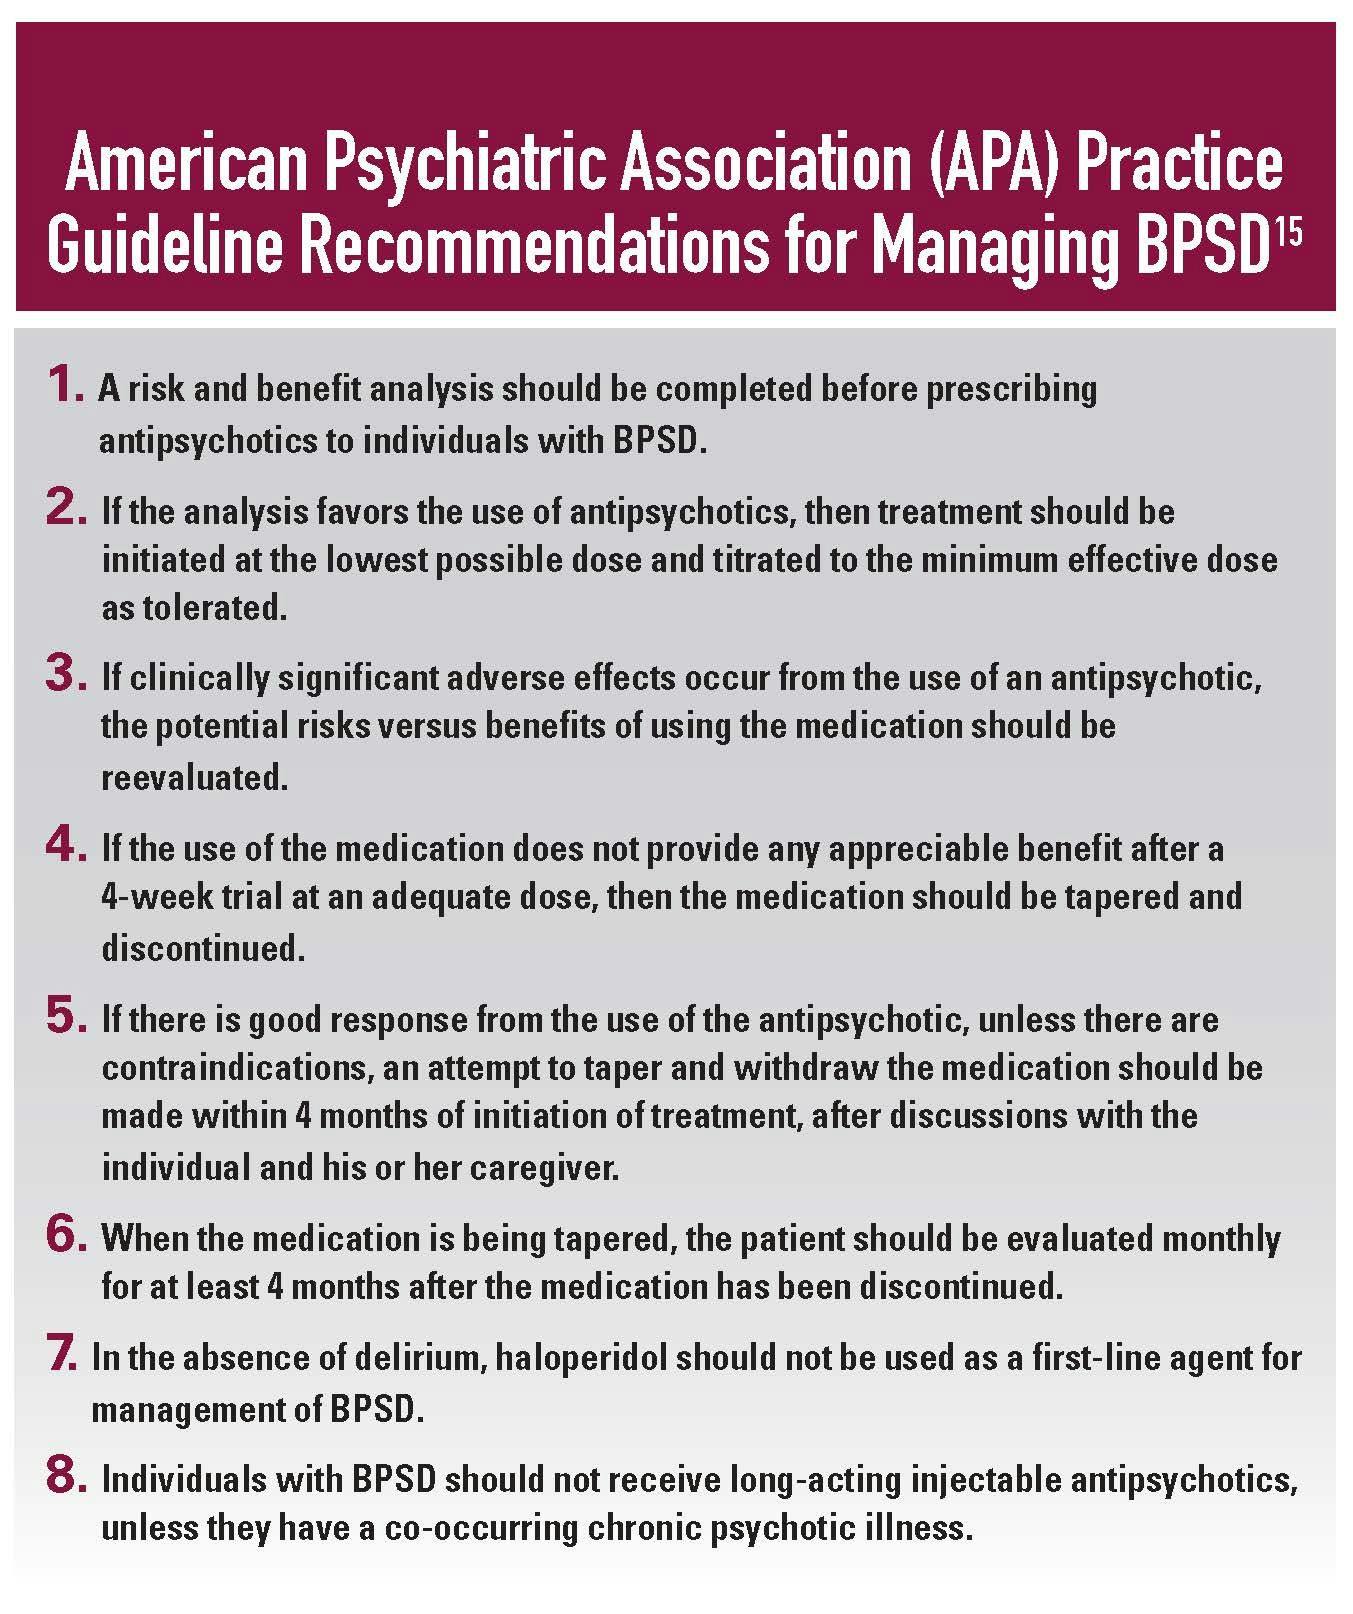 American Psychiatric Association (APA) Practice Guideline Recommendations for Managing BPSD